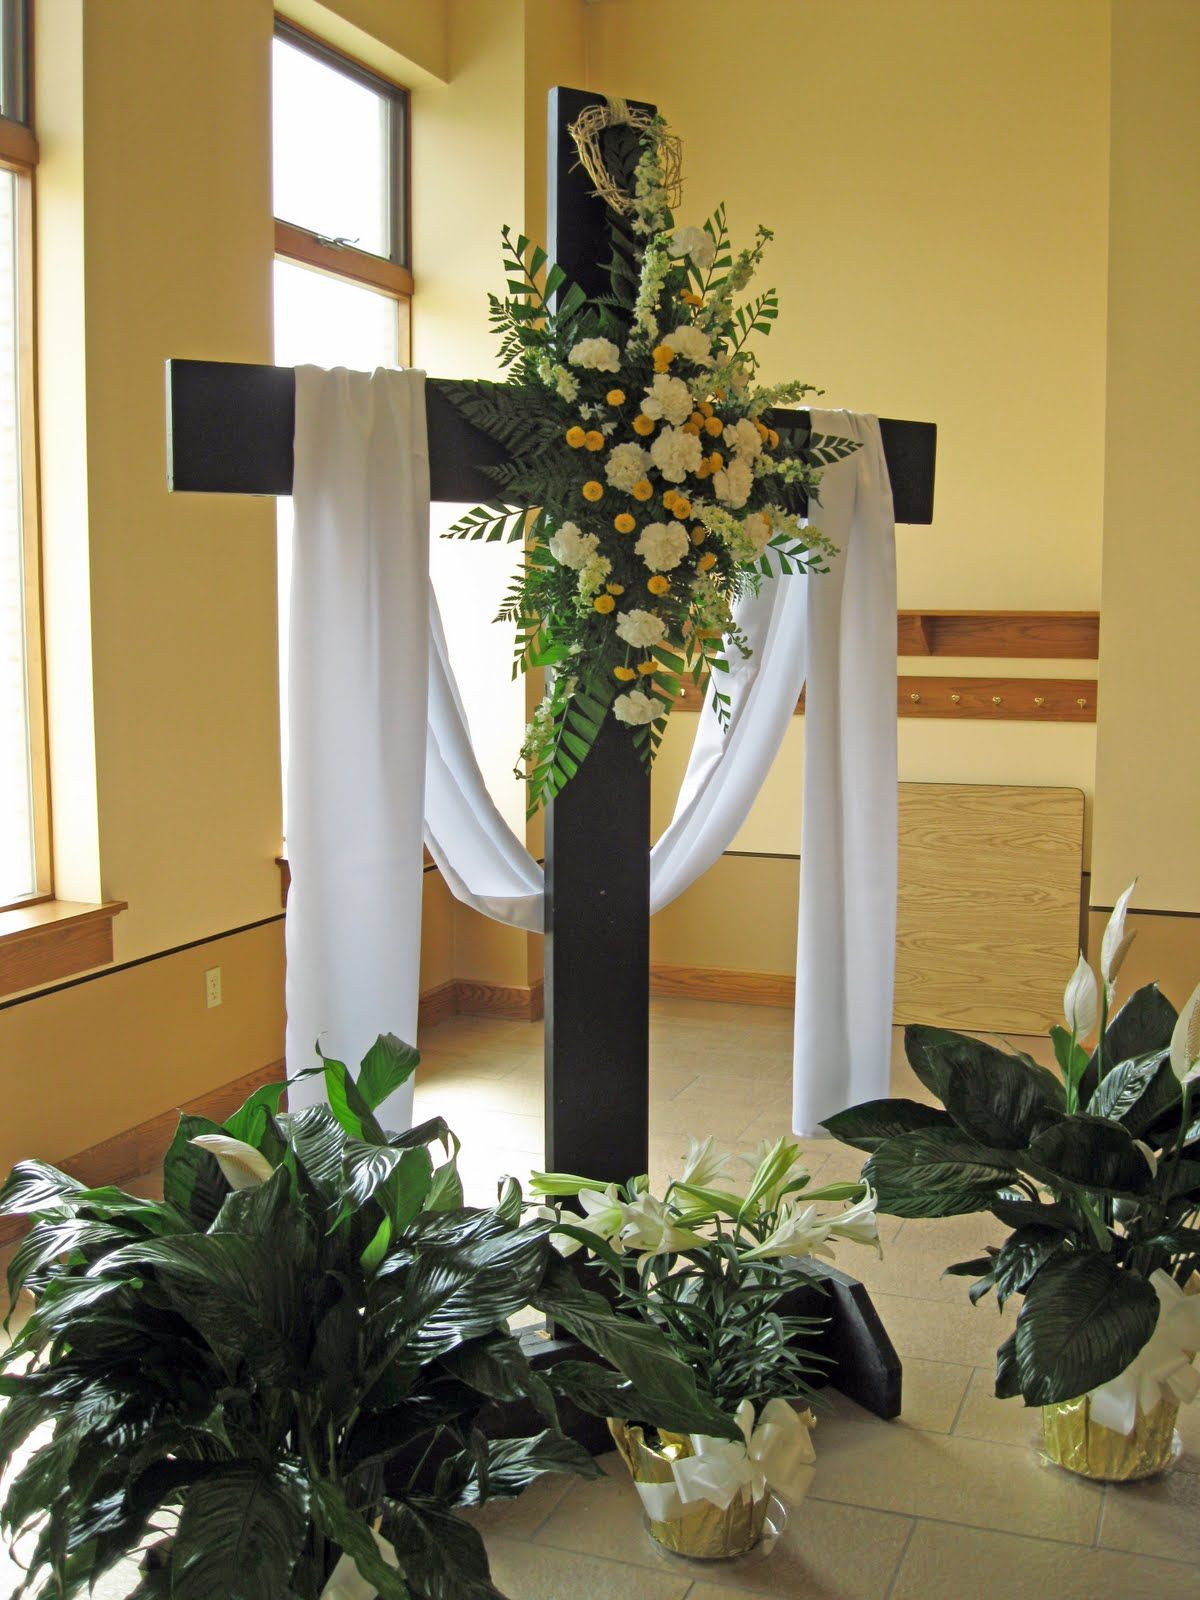 Easter Church Ideas
 Tulle & Floral church Decoration Ideas for Easter